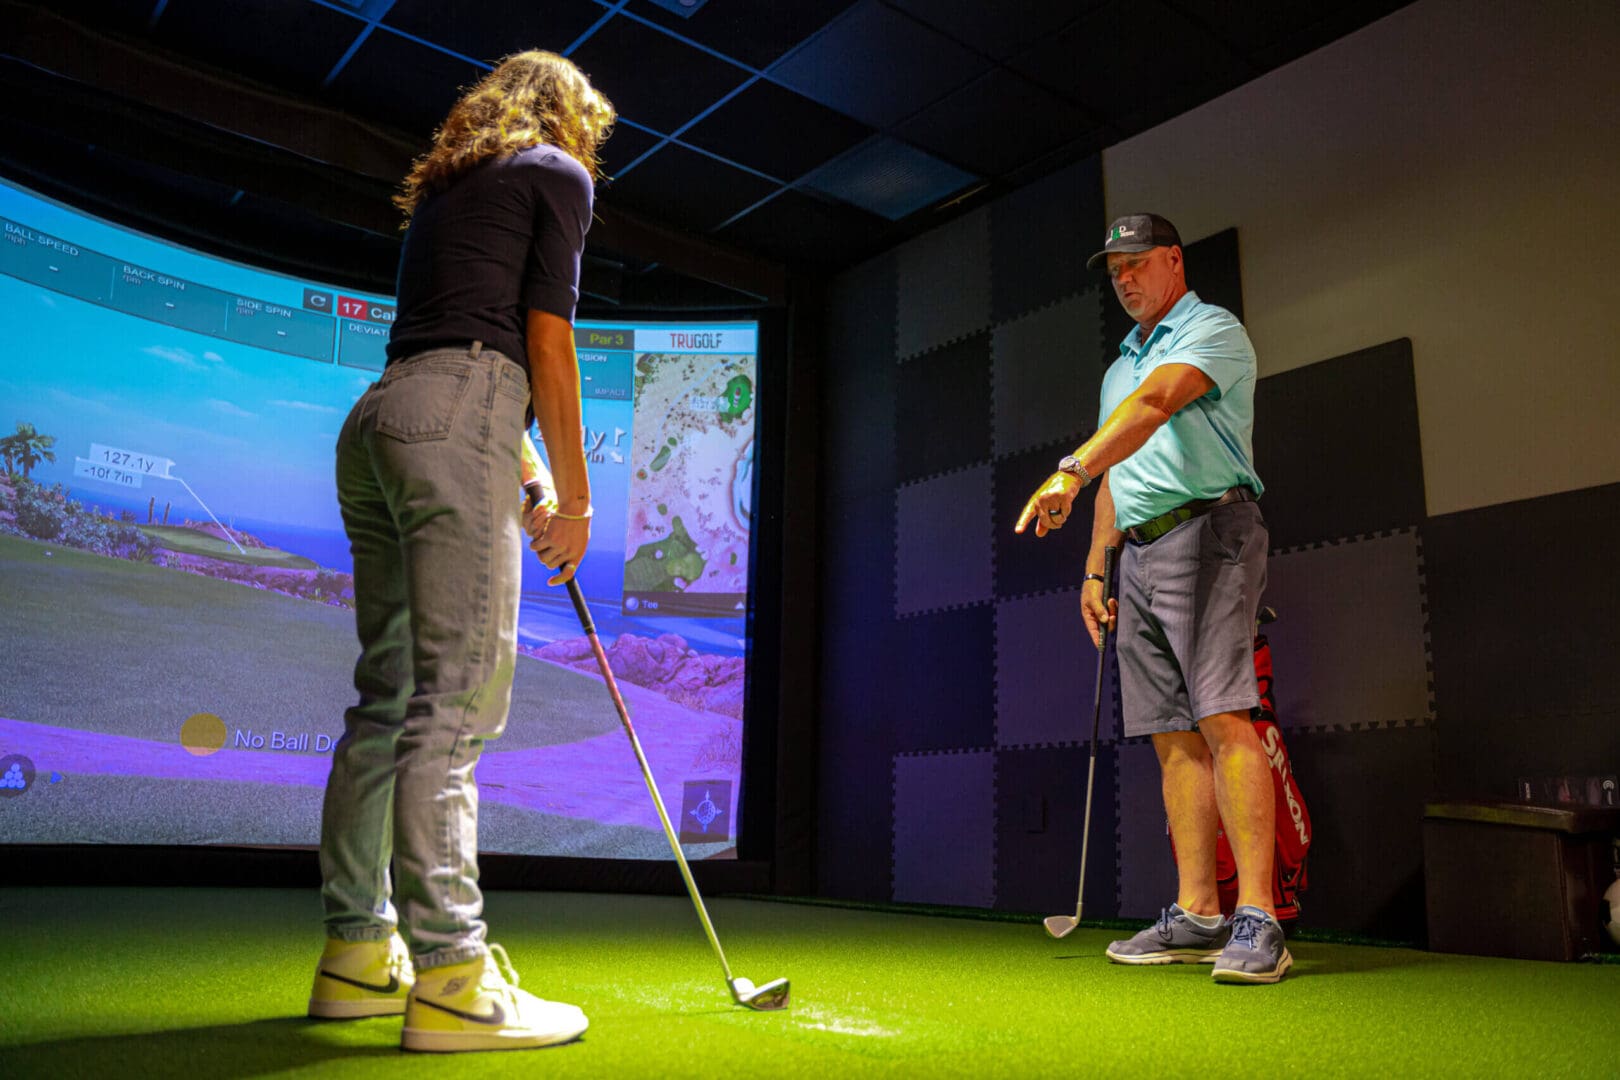 Two people playing Golf indoors in front of a screen